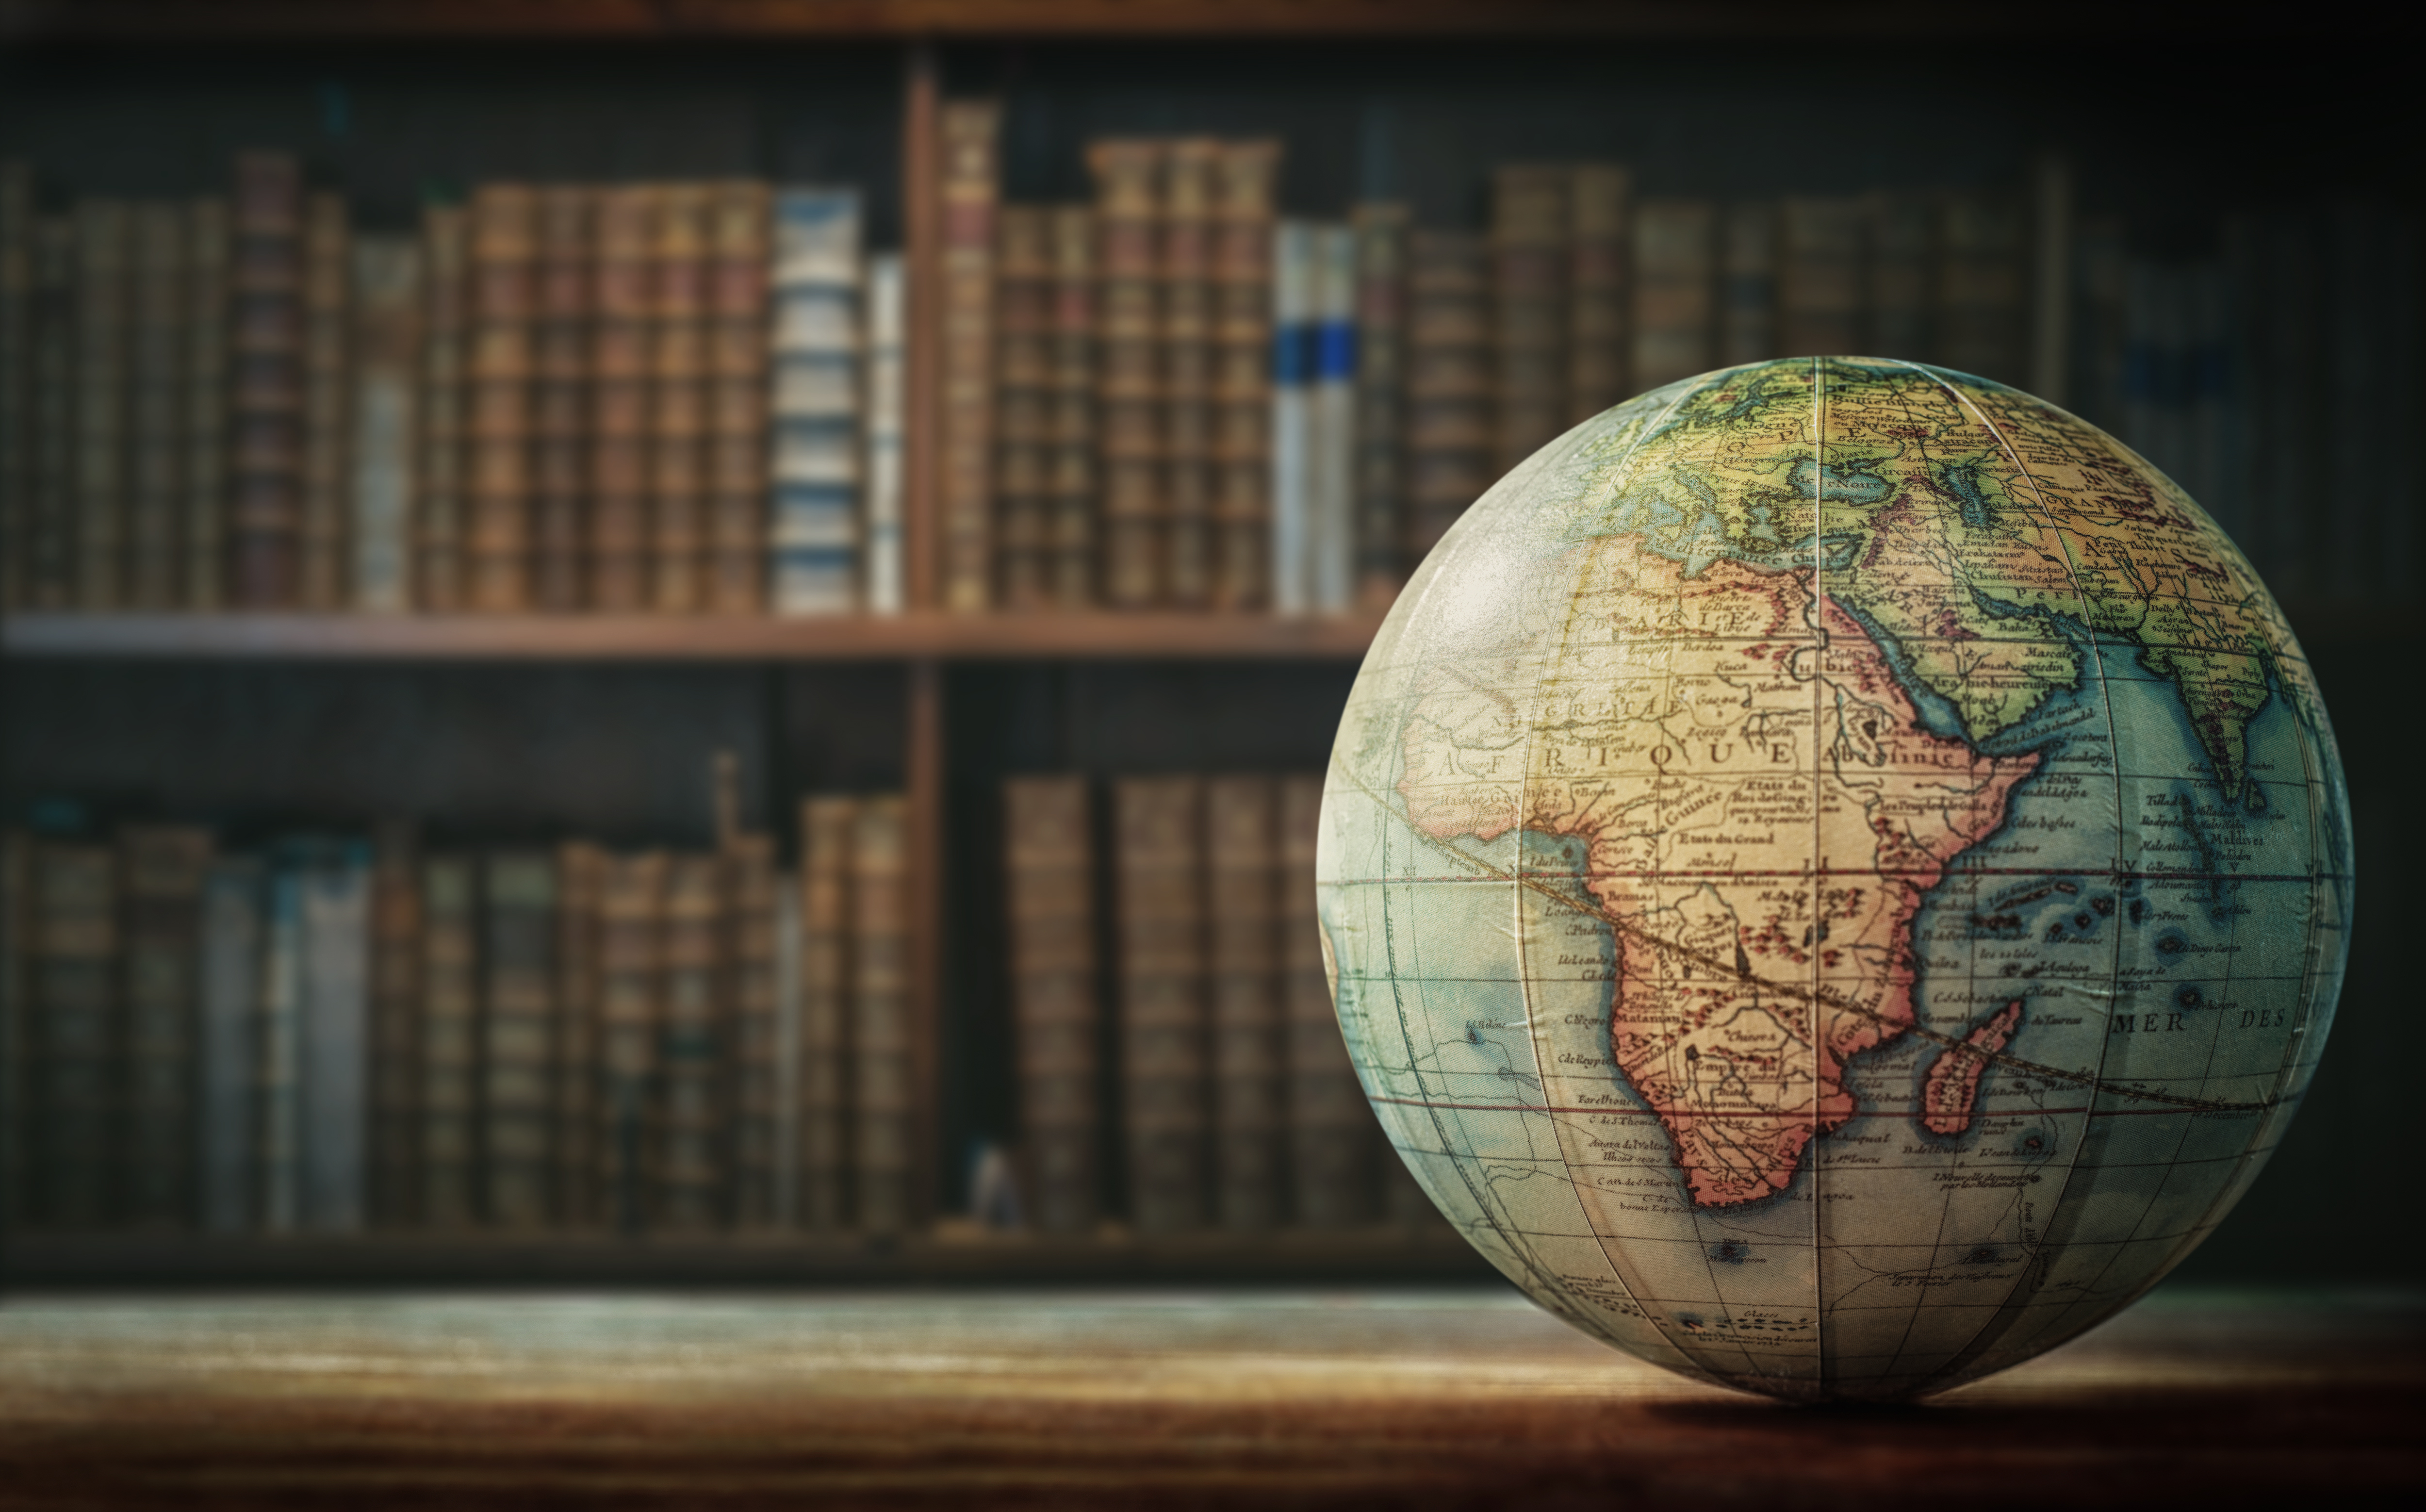 A globe in the foreground with shelves of old books in the background